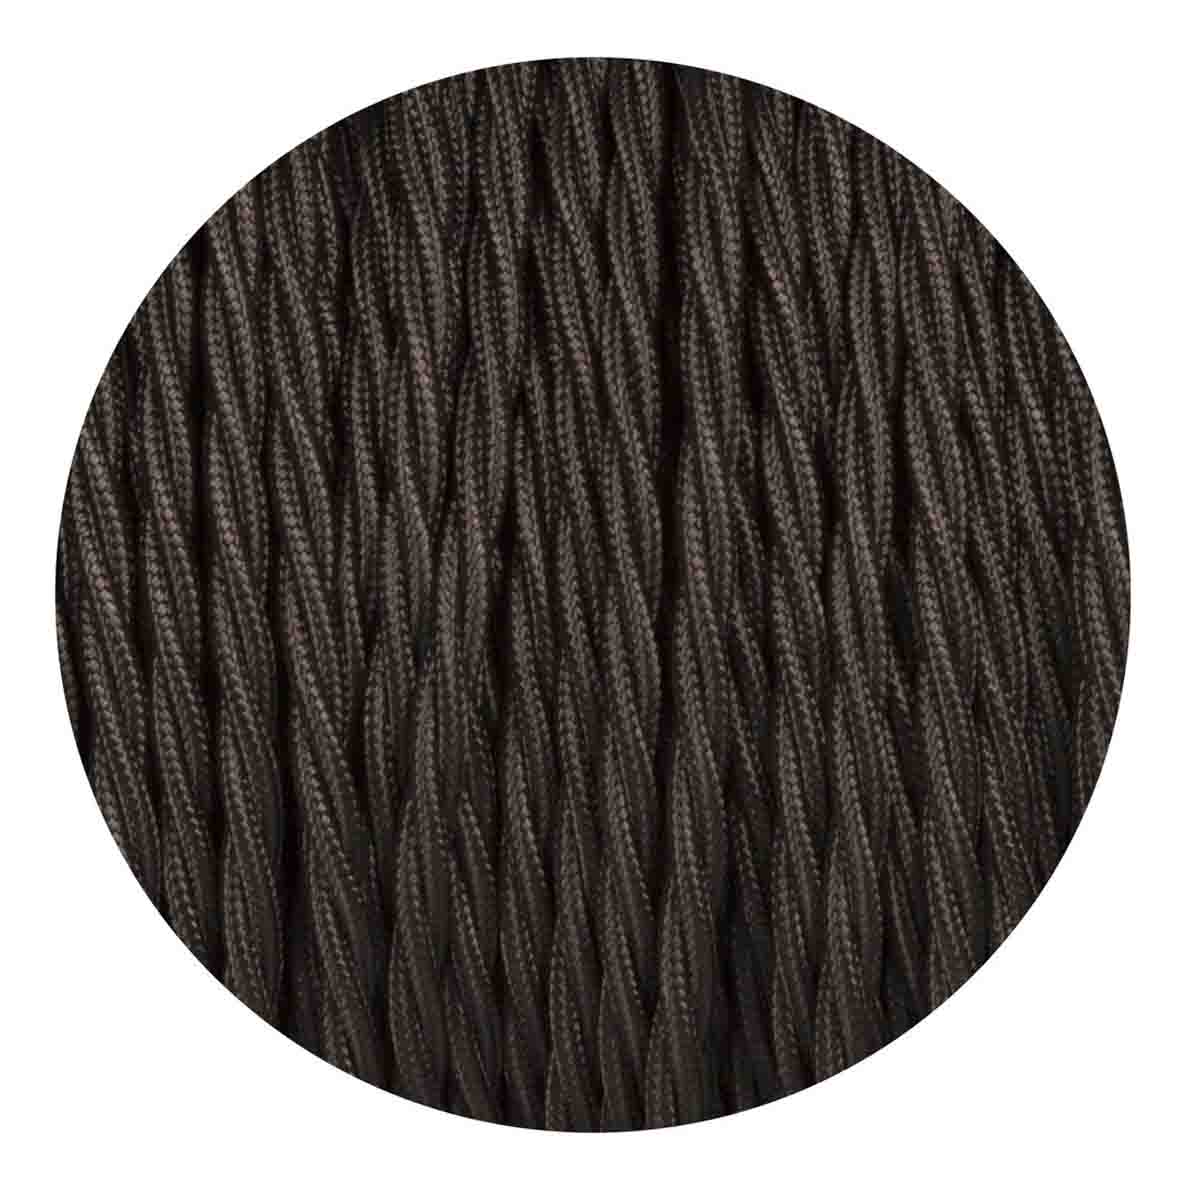 2 Core Twisted Electric Cable covered  Black colour 5m fabric 0.75mm